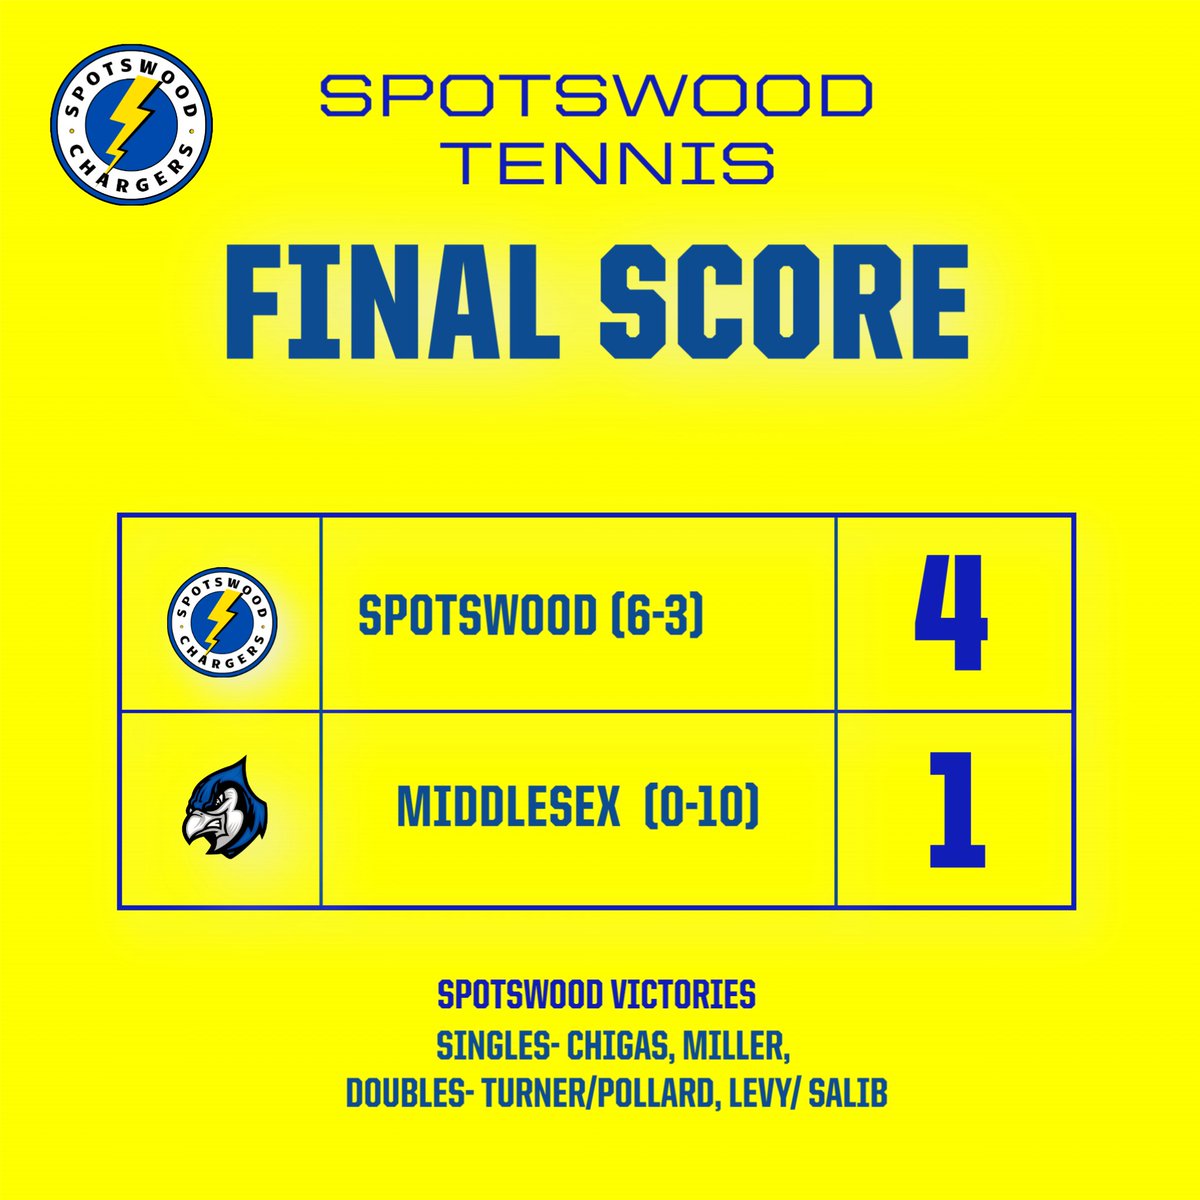 Spotswood improved to 6-3 on the season with the victory over Middlesex. highschoolsports.nj.com/game/934454